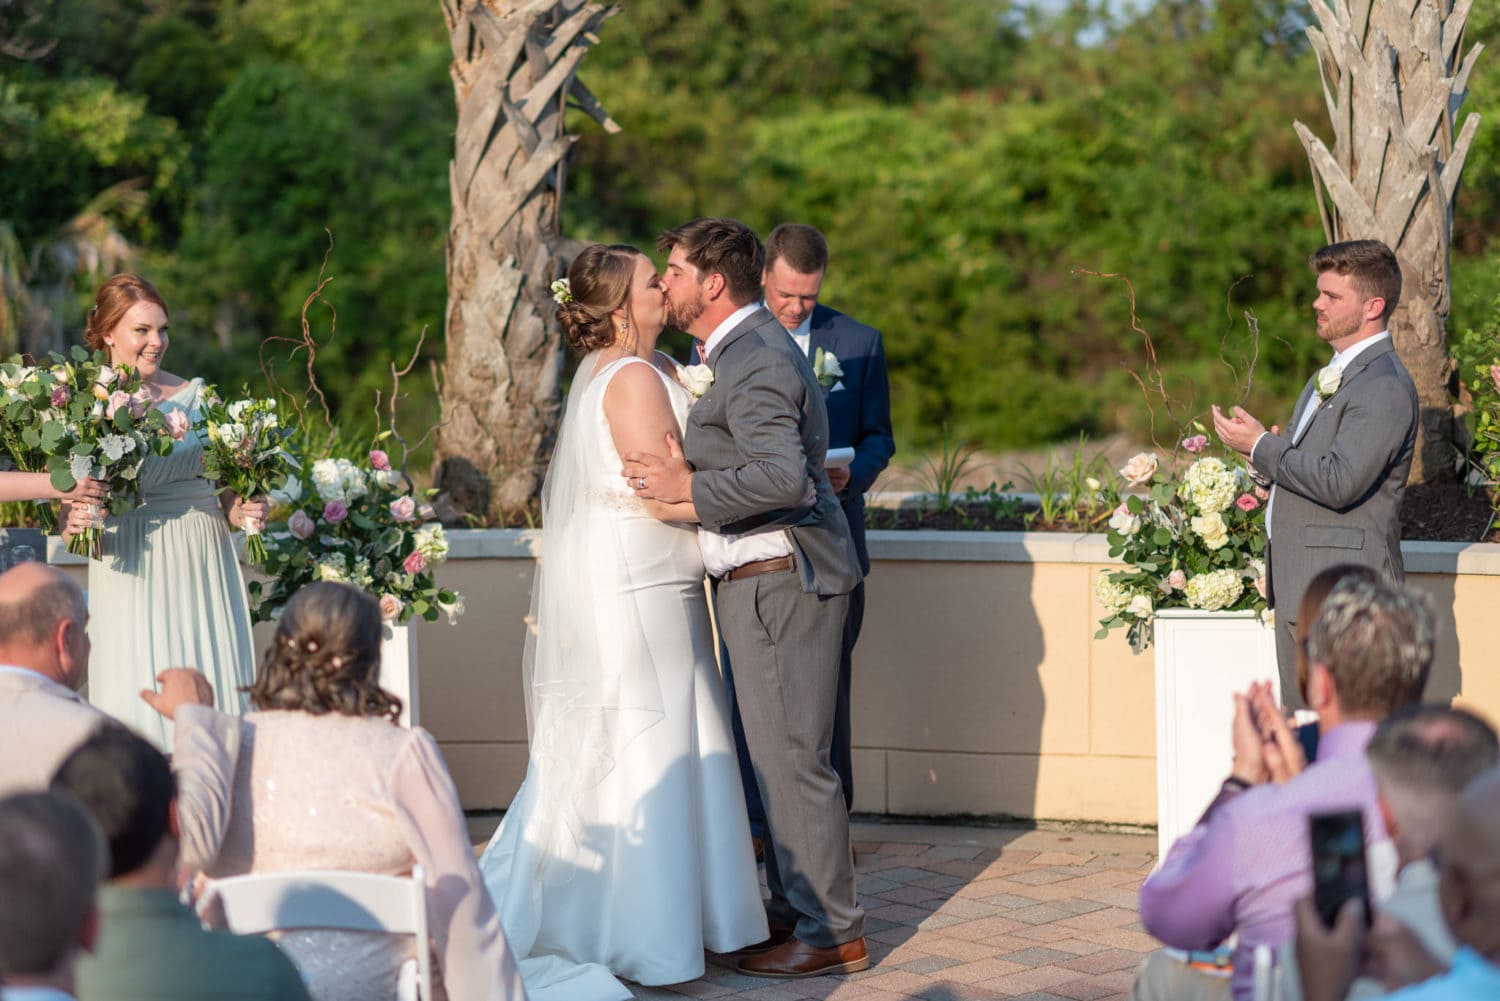 Wedding ceremony by the palm trees on the patio - Grande Dunes Ocean Club - Myrtle Beach